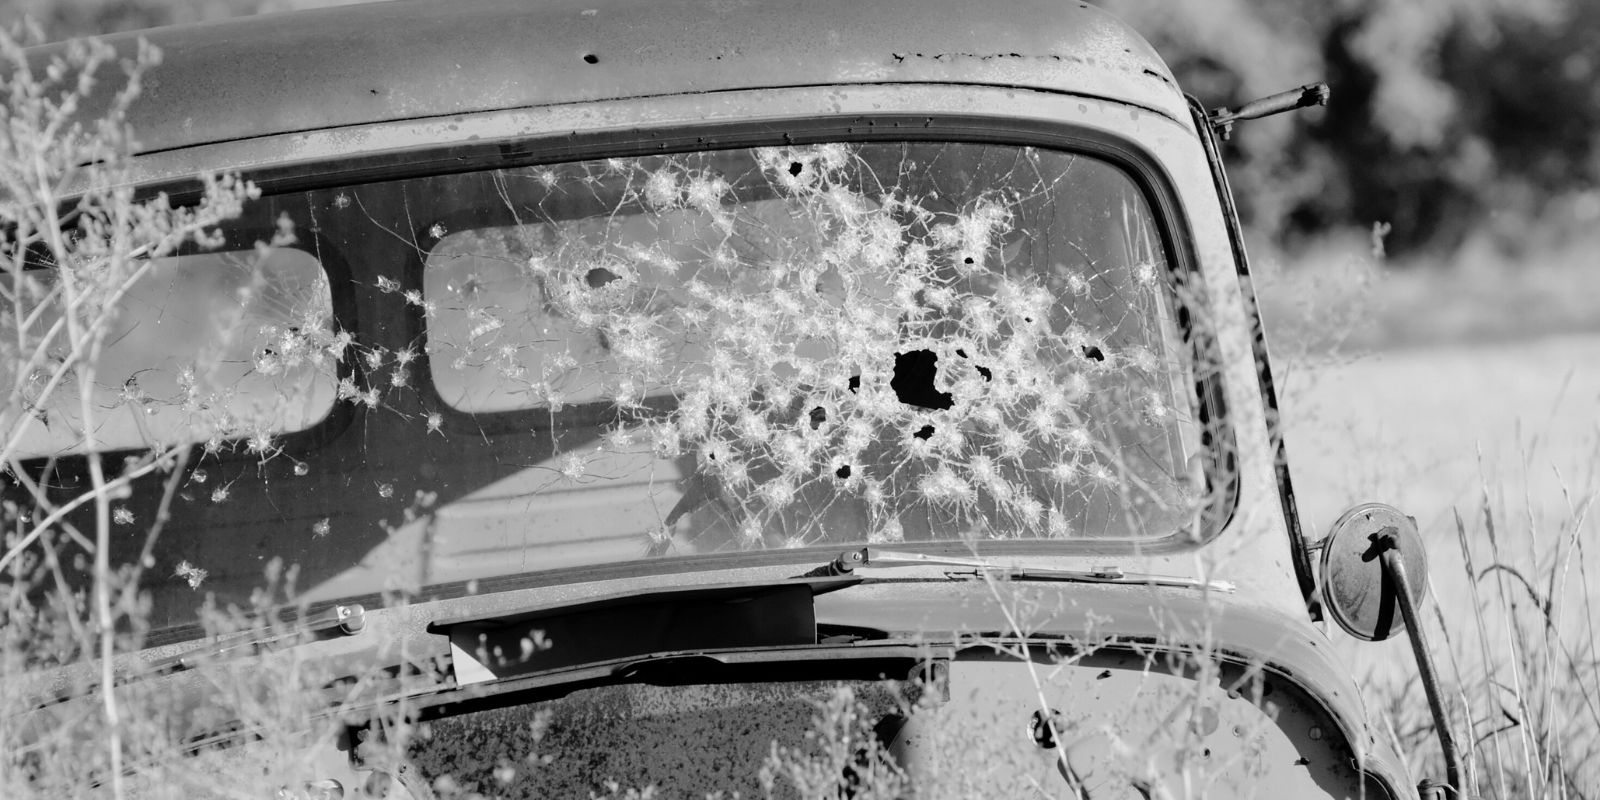 May 23rd: Bonnie & Clyde Killed By Police